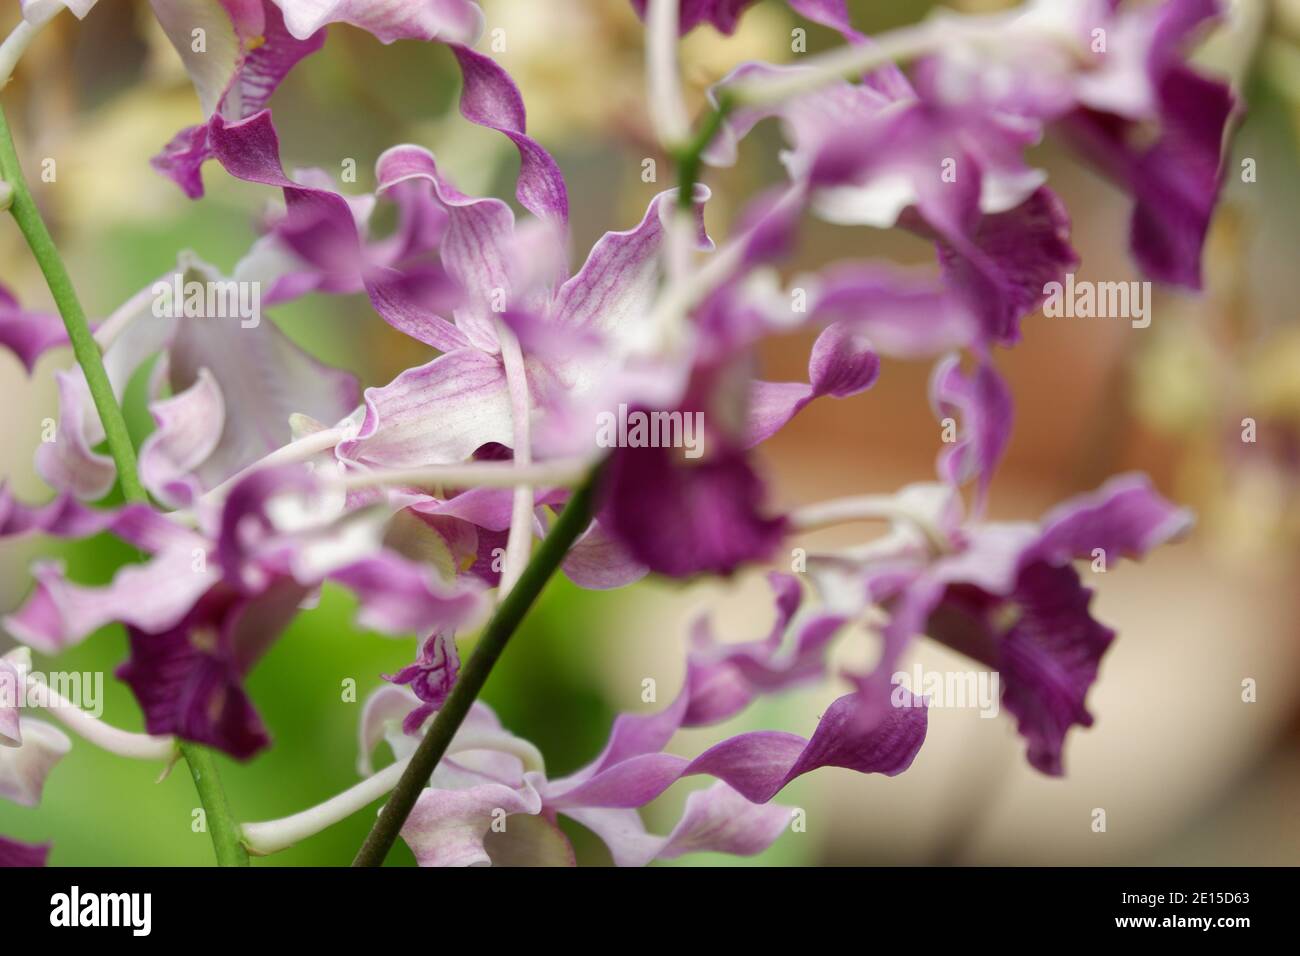 selective focus close up image of purple curly dendrobium orchid flowers full bloom in the garden isolated blur background Stock Photo